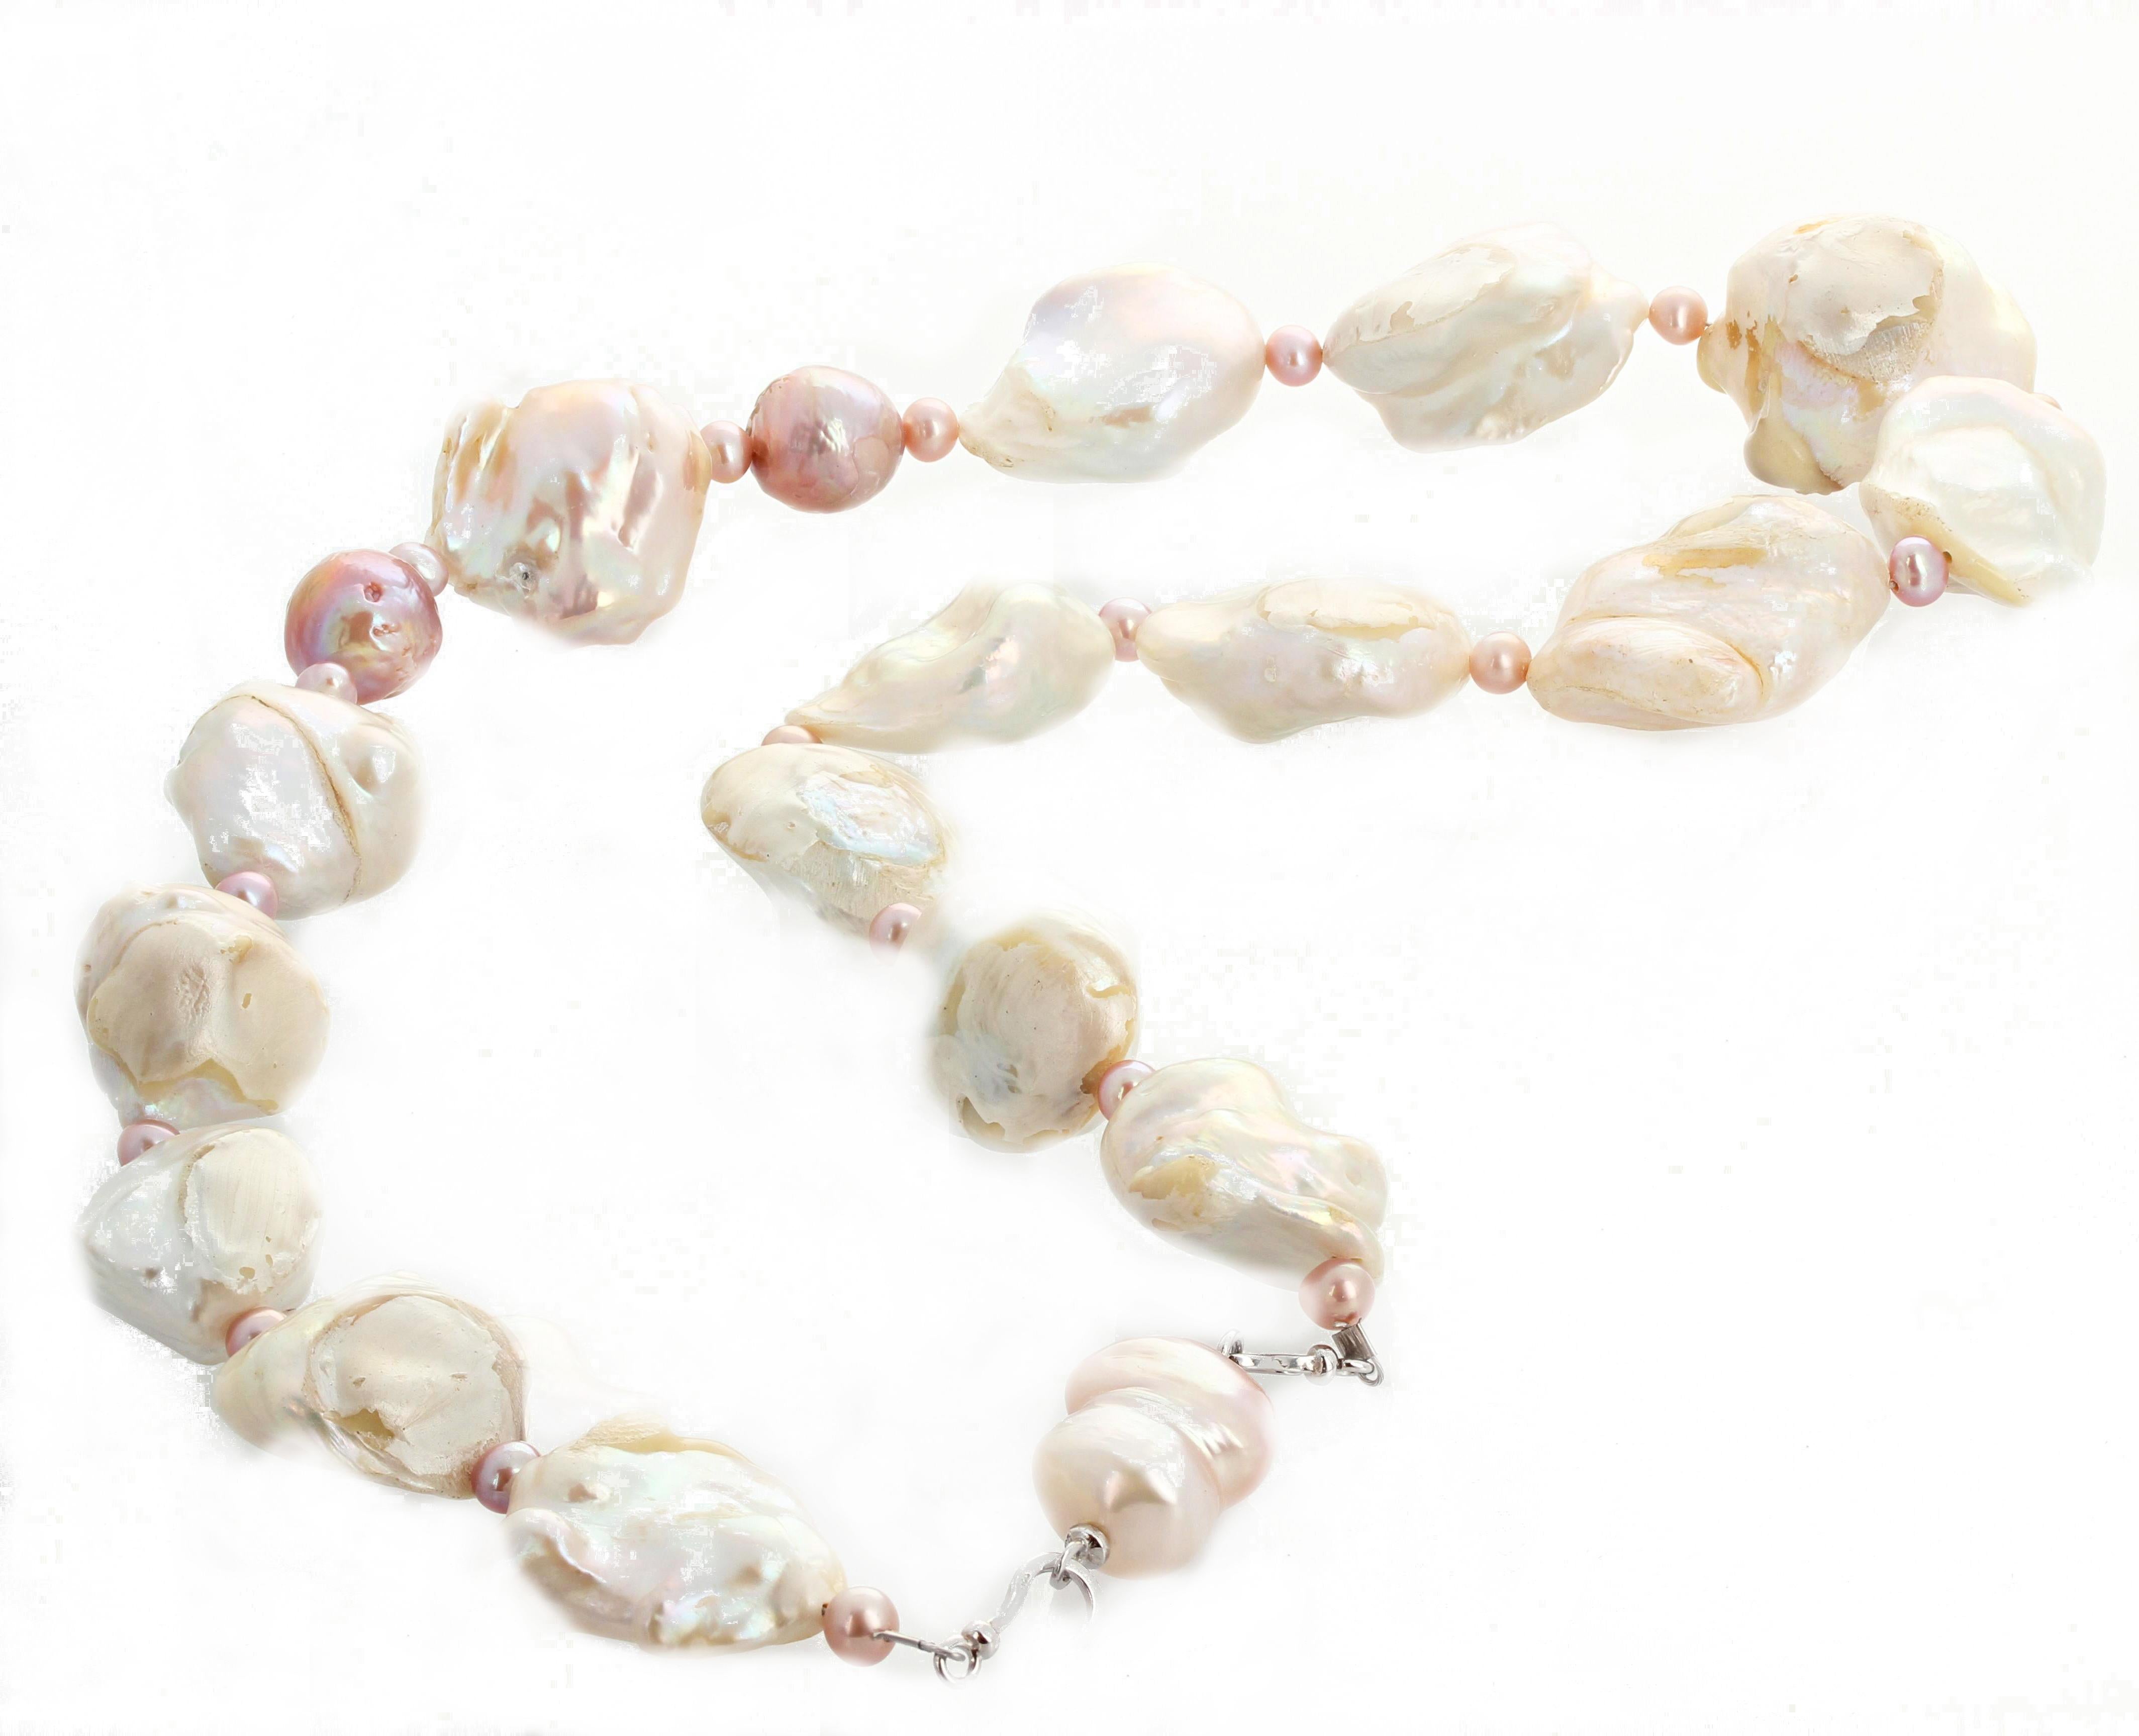 AJD Dramatic Cultured Glowing Baroque White Pearls & Pinkish Pearl 22